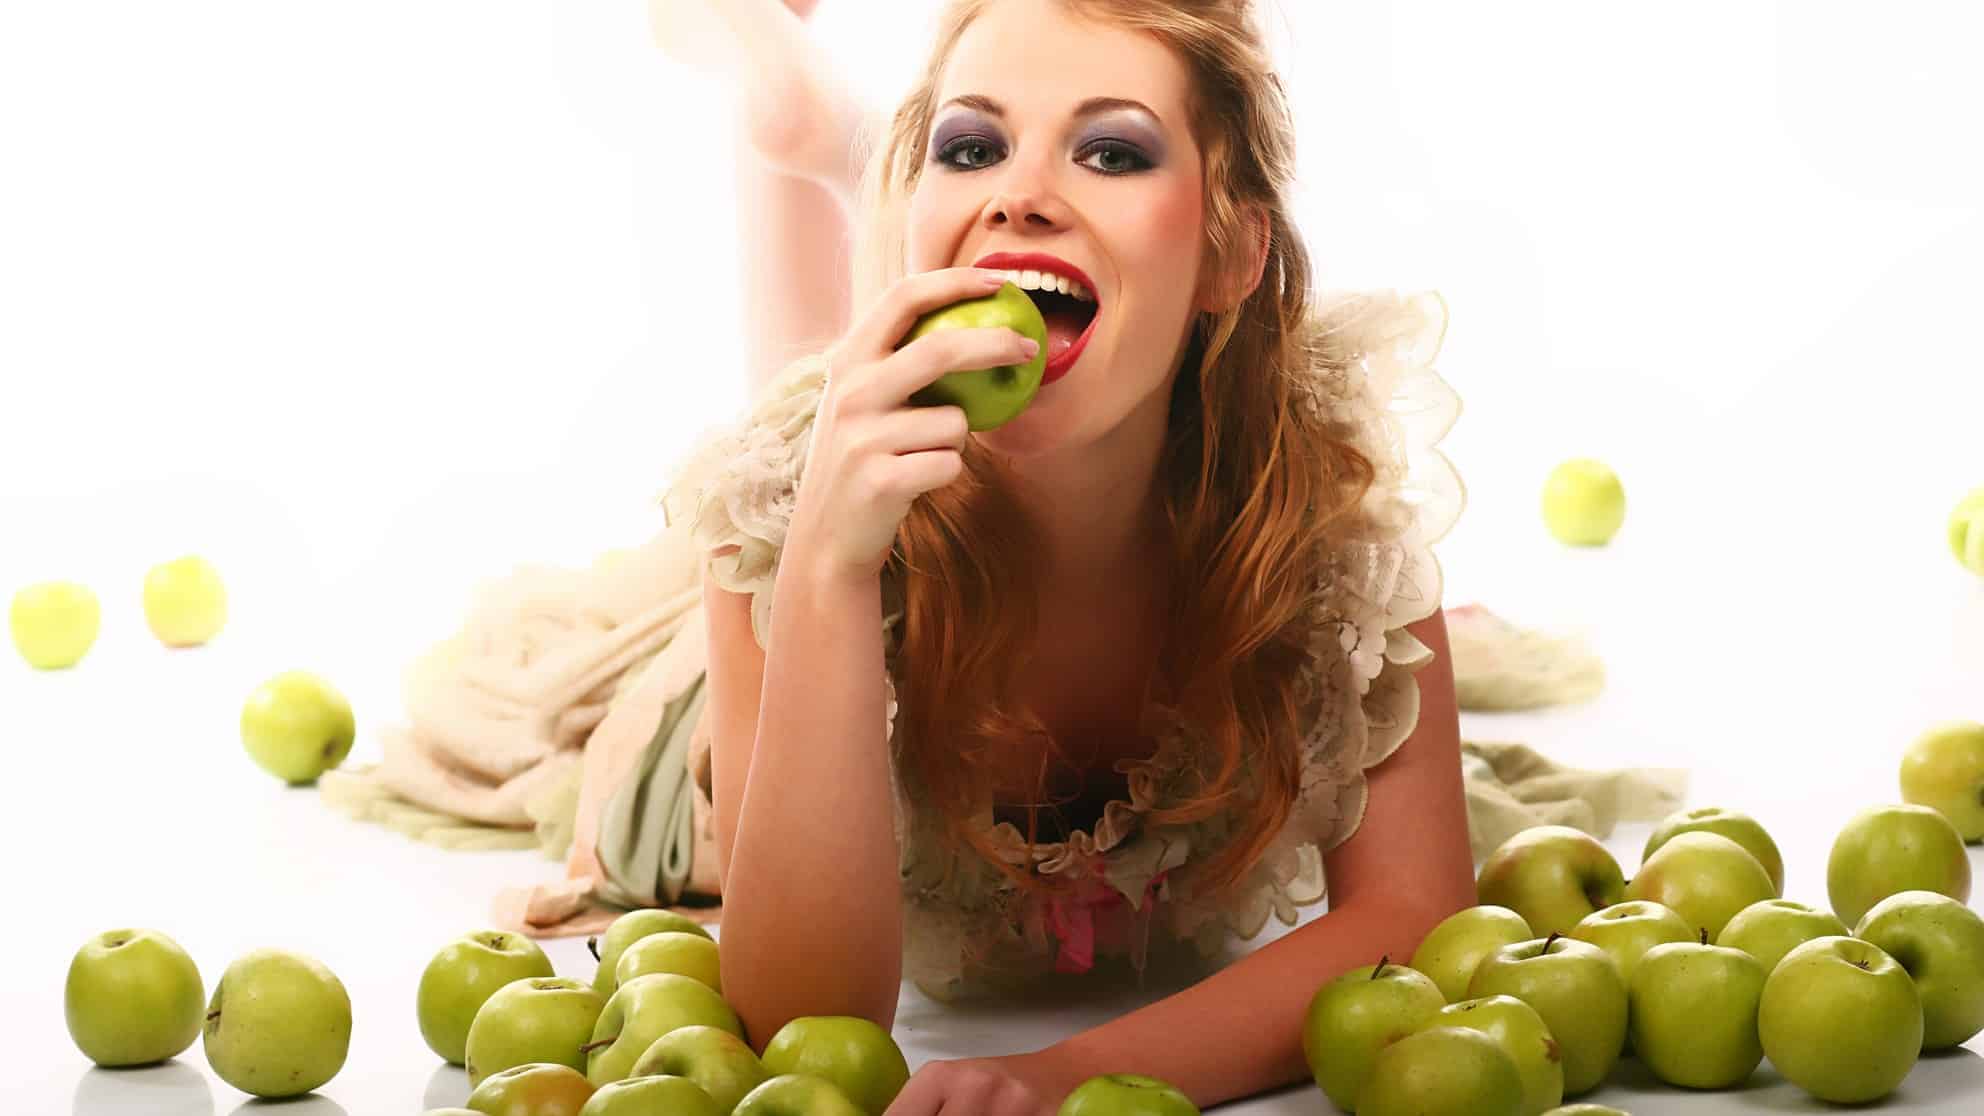 a young woman lies on the floor propped on her elbows holding a green apple to her mouth amid a large scattering of green apples around her on the floor. She is smiling and holding her mouth wide open as she is about to take a big bite of the apple she holds in her hand near her mouth.